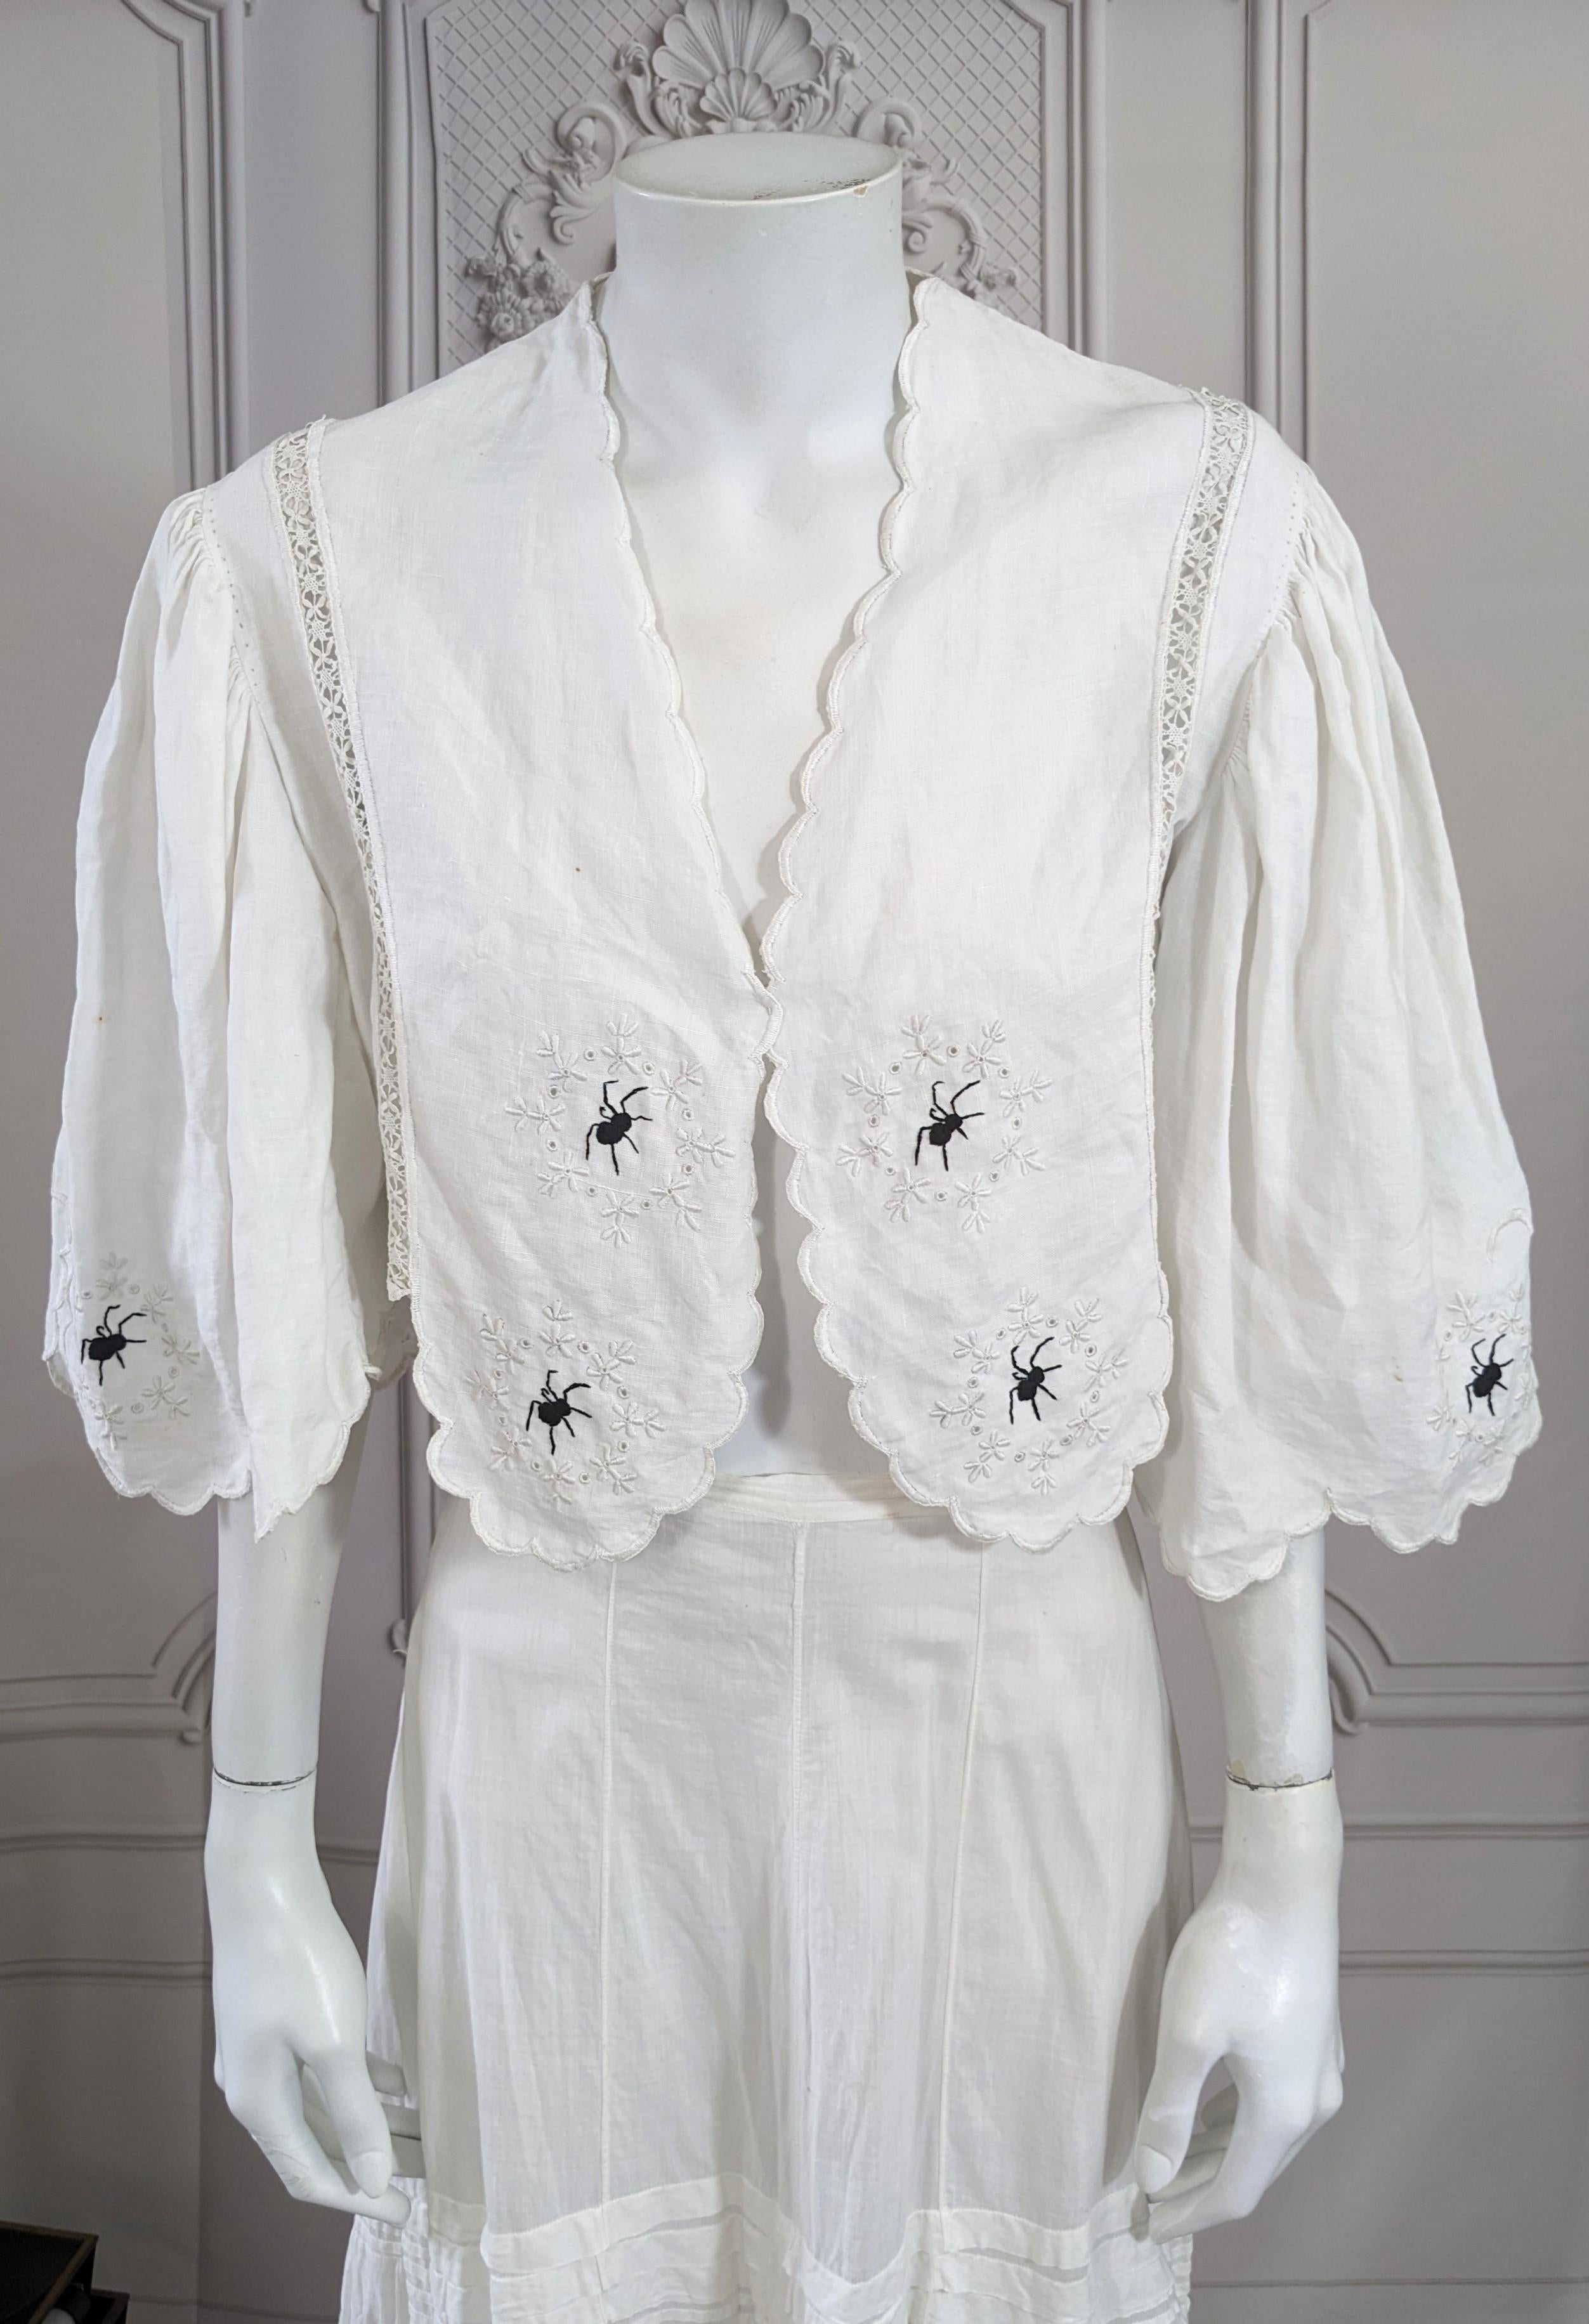 Upcycled Victorian Linen Spider Bolero by Studio VL. We have hand embroidered a series of tiny black spiders within each original embroidered cartouche on the body and along the hems of sleeves. Very full bell sleeves in full bodied linen. No